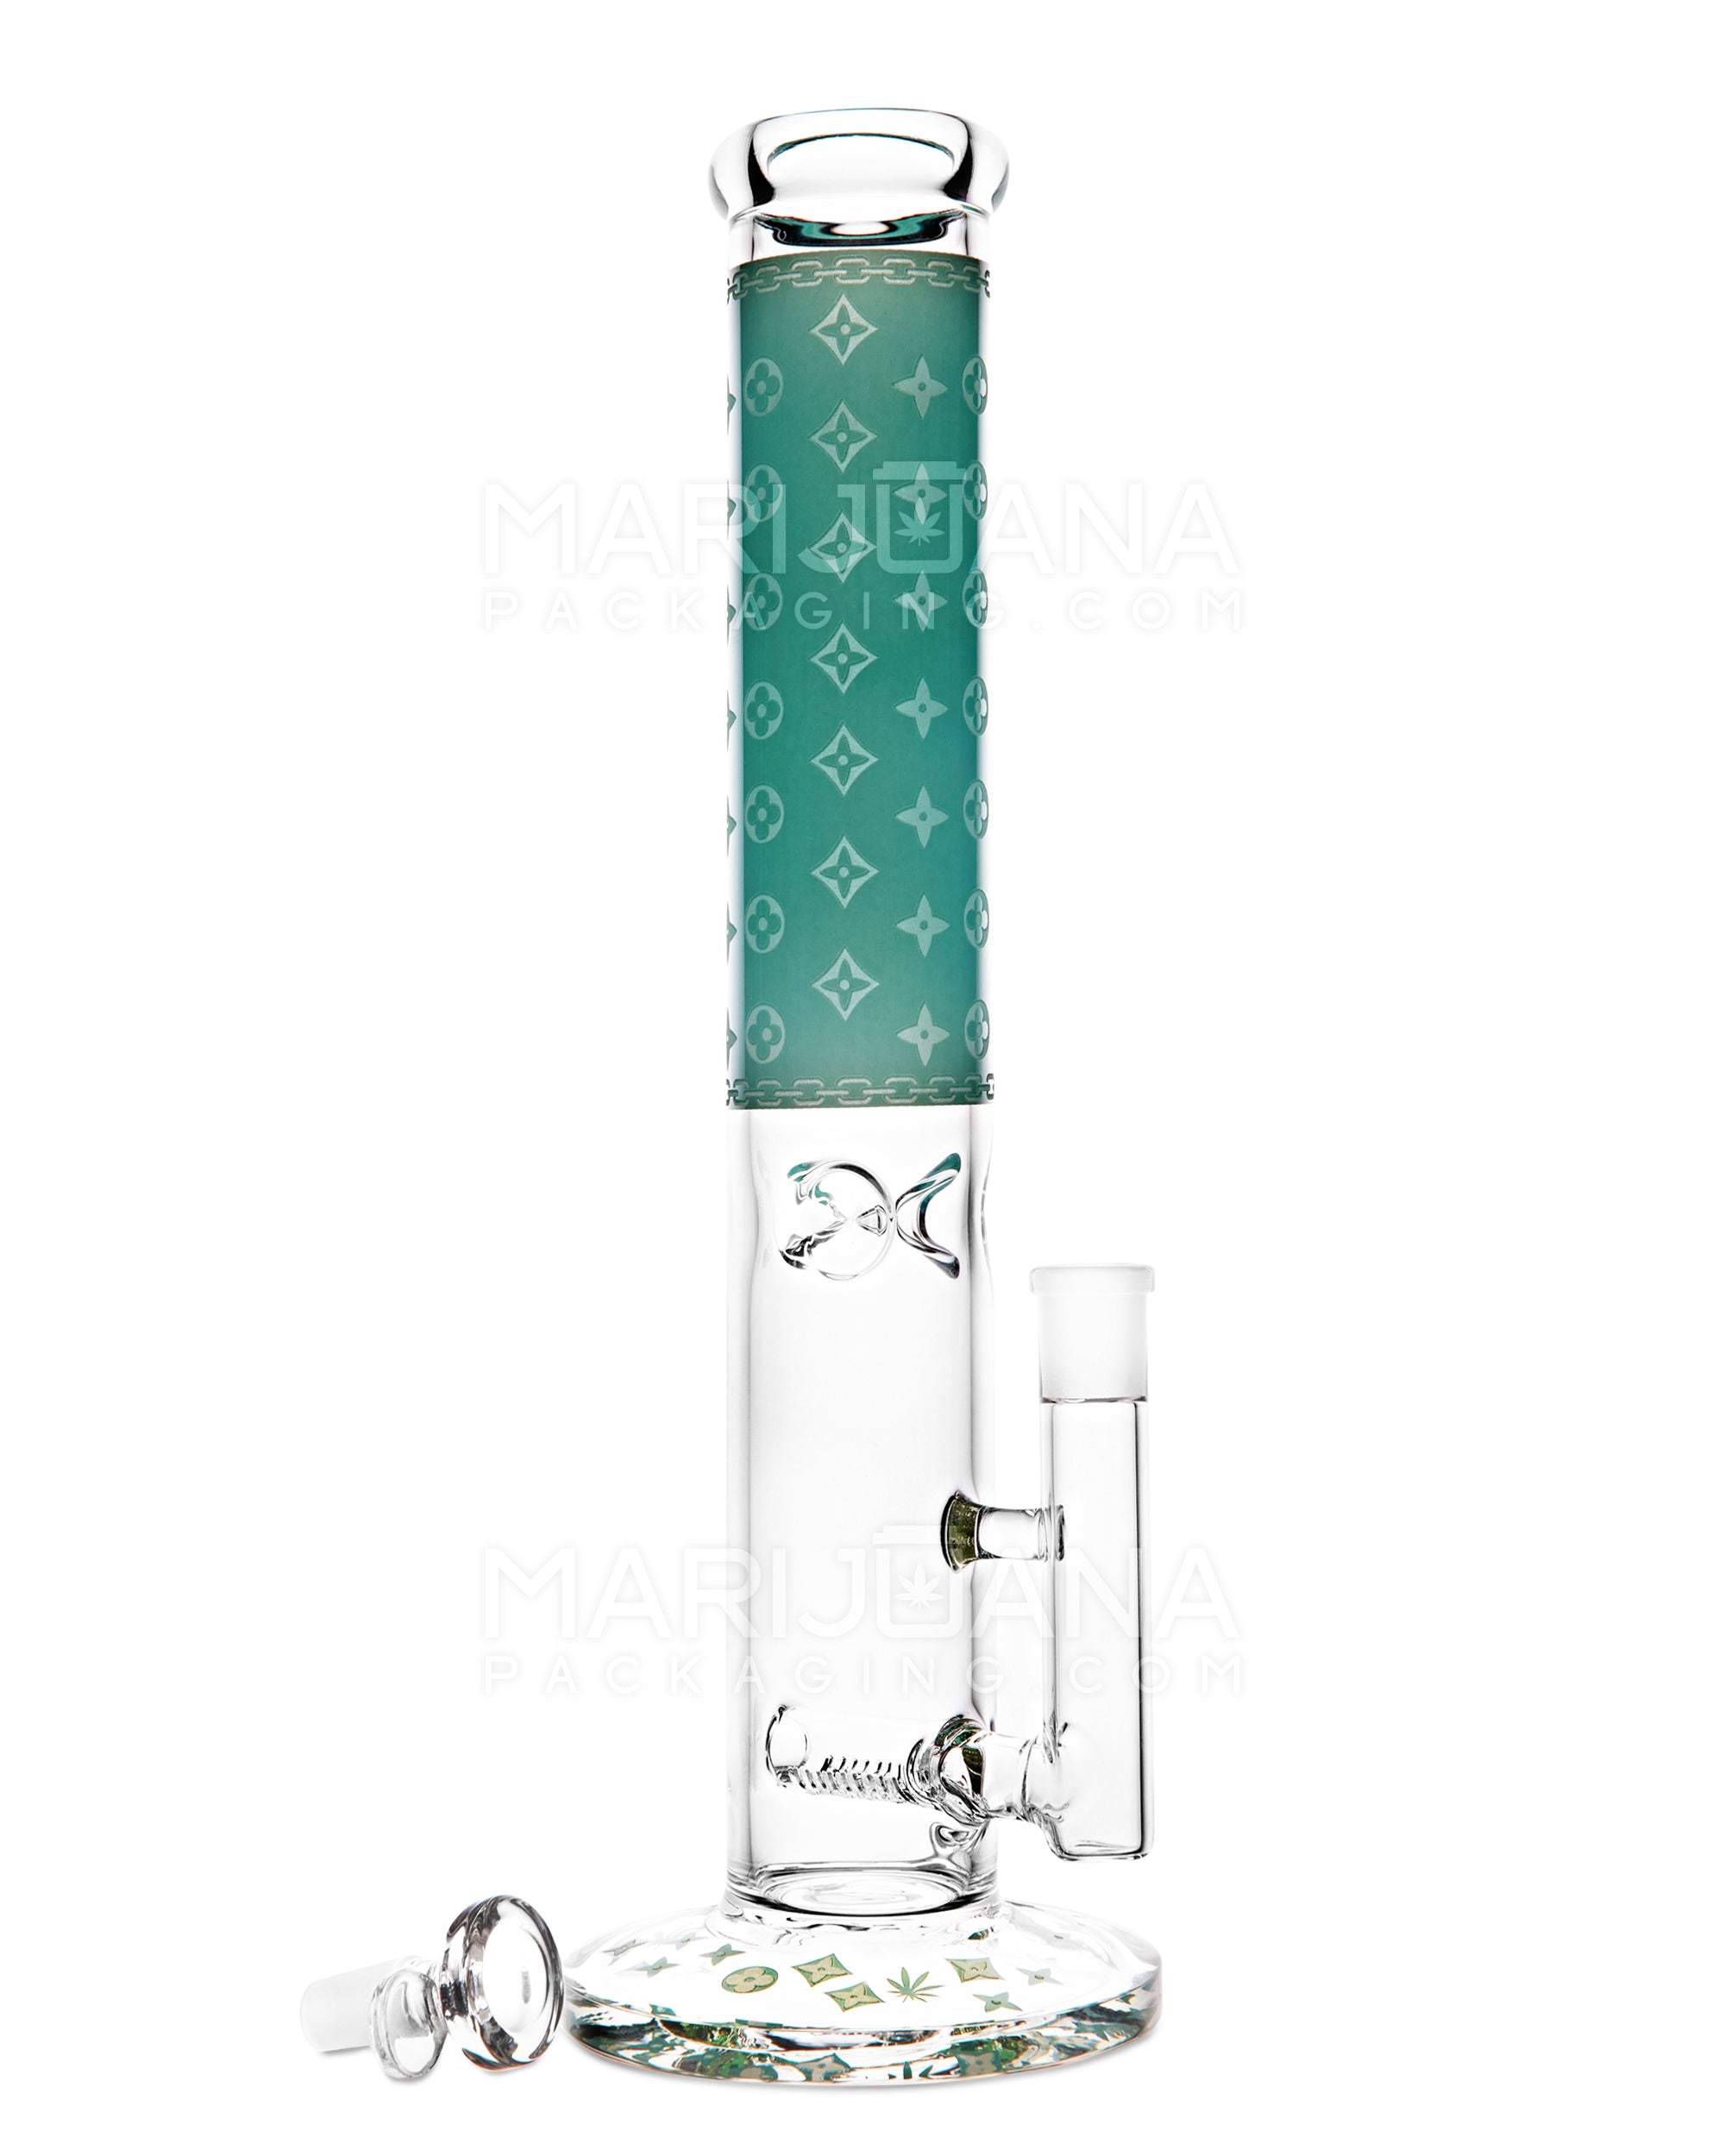 Straight Neck Luxury Design Inline Perc Glass Water Pipe w/ Ice Catcher | 14in Tall - 14mm Bowl - Blue - 2